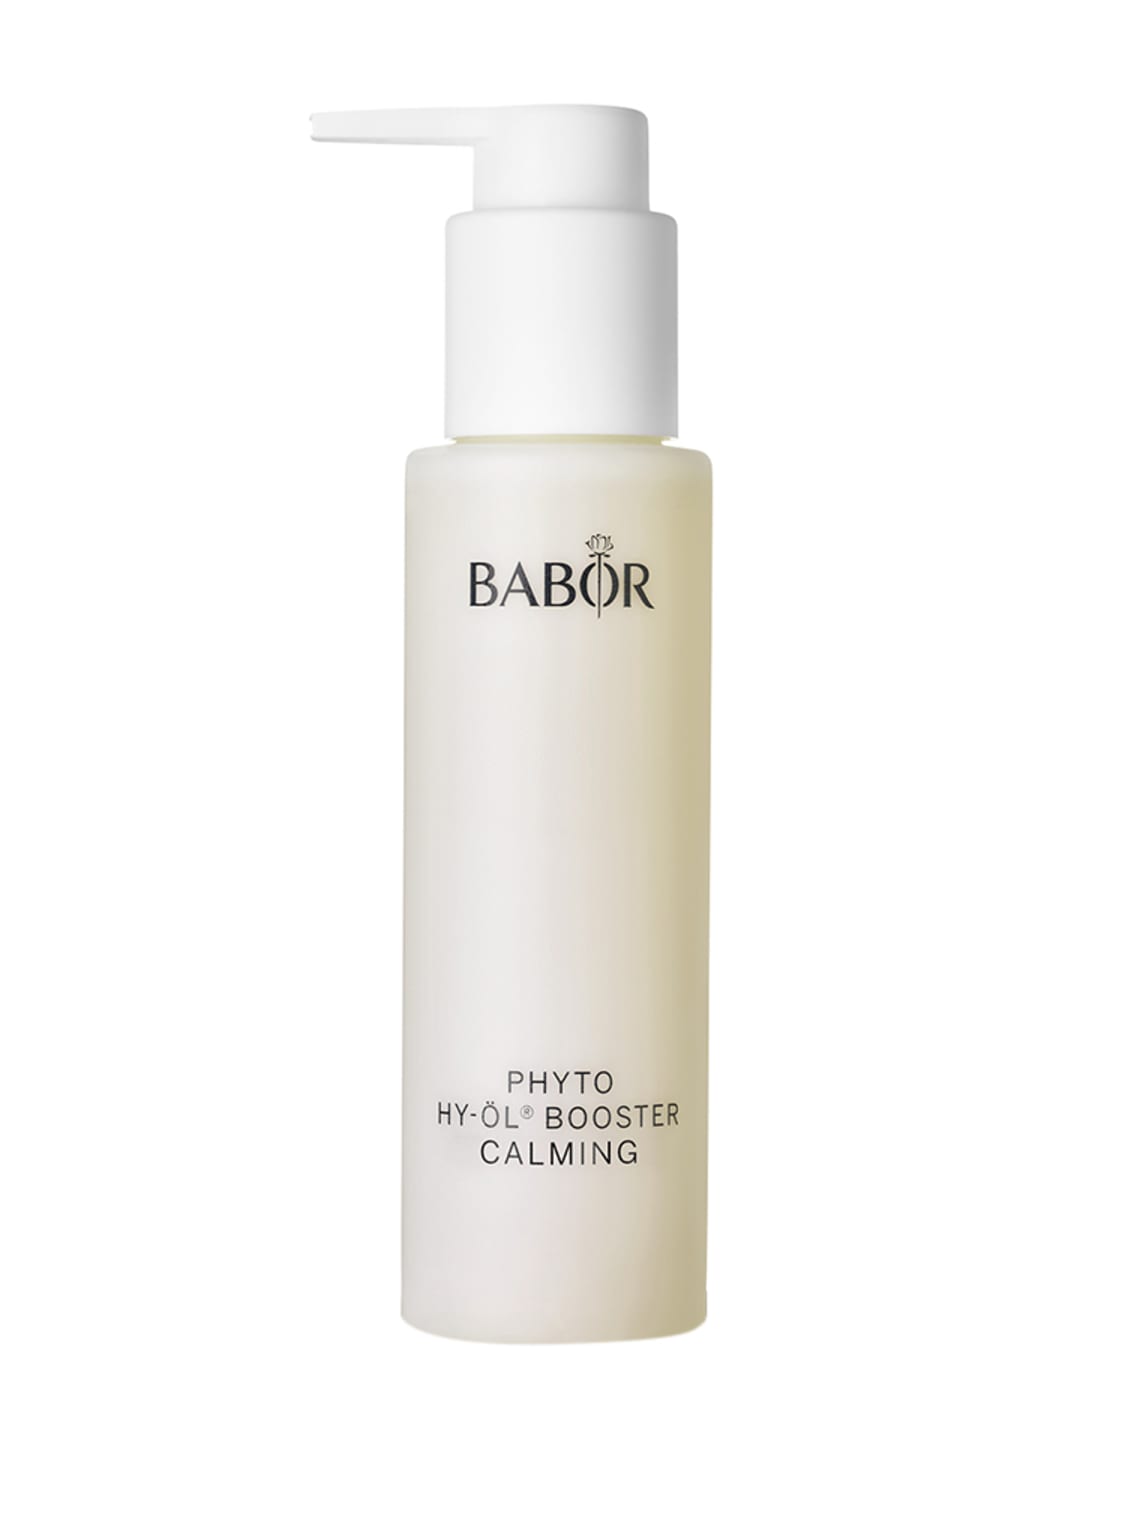 Babor Cleansing Phyto HY-ÖL Booster Calming 100 ml von BABOR